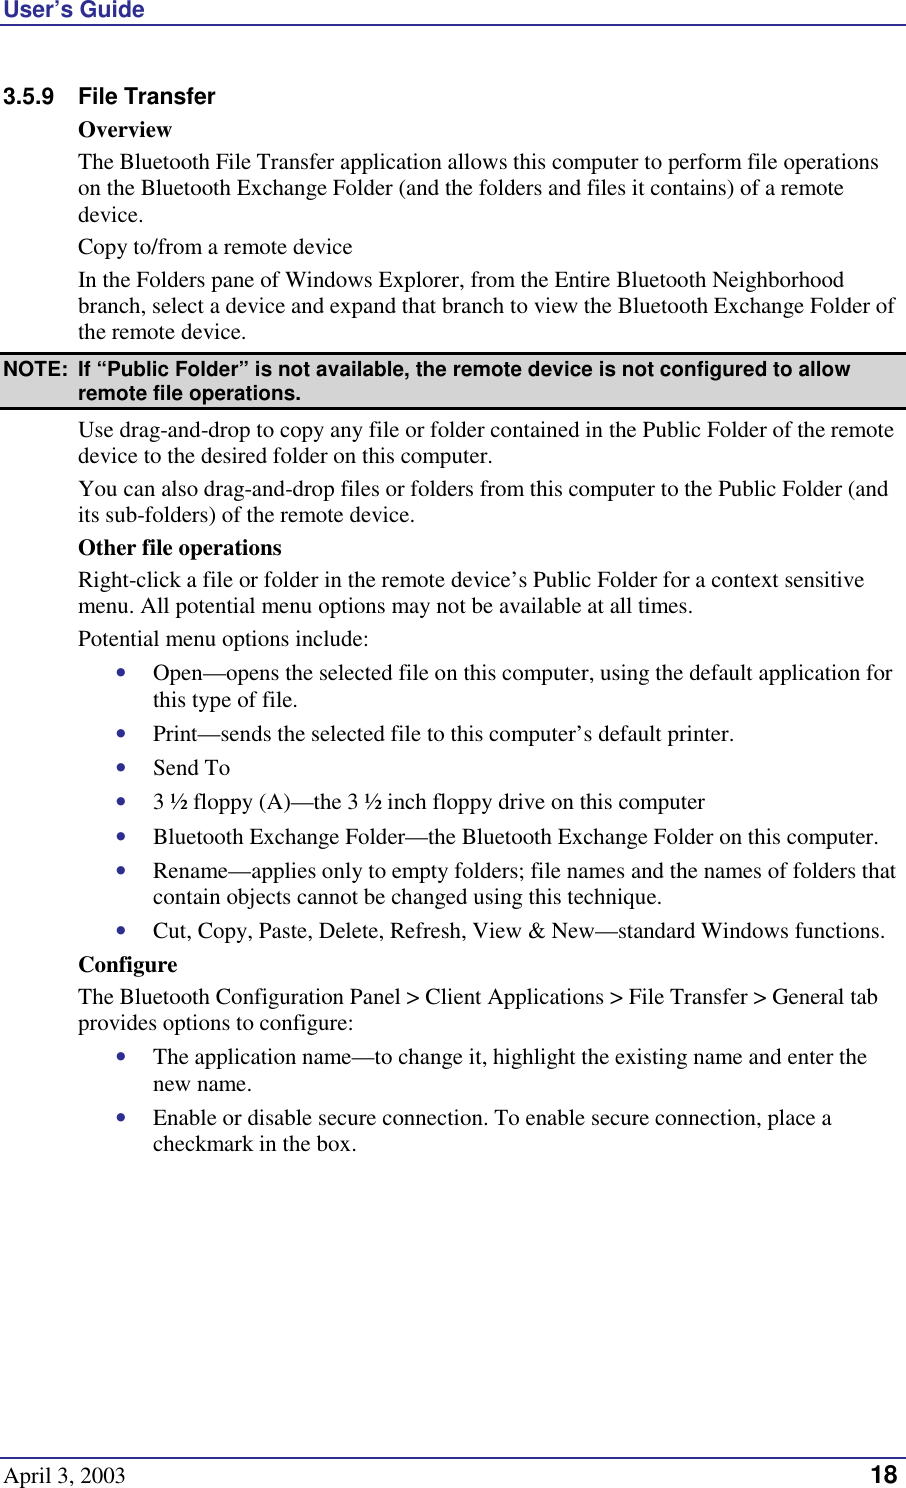 User’s Guide April 3, 2003   18 3.5.9 File Transfer Overview The Bluetooth File Transfer application allows this computer to perform file operations on the Bluetooth Exchange Folder (and the folders and files it contains) of a remote device. Copy to/from a remote device In the Folders pane of Windows Explorer, from the Entire Bluetooth Neighborhood branch, select a device and expand that branch to view the Bluetooth Exchange Folder of the remote device. NOTE:  If “Public Folder” is not available, the remote device is not configured to allow remote file operations. Use drag-and-drop to copy any file or folder contained in the Public Folder of the remote device to the desired folder on this computer. You can also drag-and-drop files or folders from this computer to the Public Folder (and its sub-folders) of the remote device. Other file operations Right-click a file or folder in the remote device’s Public Folder for a context sensitive menu. All potential menu options may not be available at all times. Potential menu options include: •  Open—opens the selected file on this computer, using the default application for this type of file. •  Print—sends the selected file to this computer’s default printer. •  Send To •  3 ½ floppy (A)—the 3 ½ inch floppy drive on this computer •  Bluetooth Exchange Folder—the Bluetooth Exchange Folder on this computer. •  Rename—applies only to empty folders; file names and the names of folders that contain objects cannot be changed using this technique. •  Cut, Copy, Paste, Delete, Refresh, View &amp; New—standard Windows functions. Configure The Bluetooth Configuration Panel &gt; Client Applications &gt; File Transfer &gt; General tab provides options to configure: •  The application name—to change it, highlight the existing name and enter the new name. •  Enable or disable secure connection. To enable secure connection, place a checkmark in the box. 